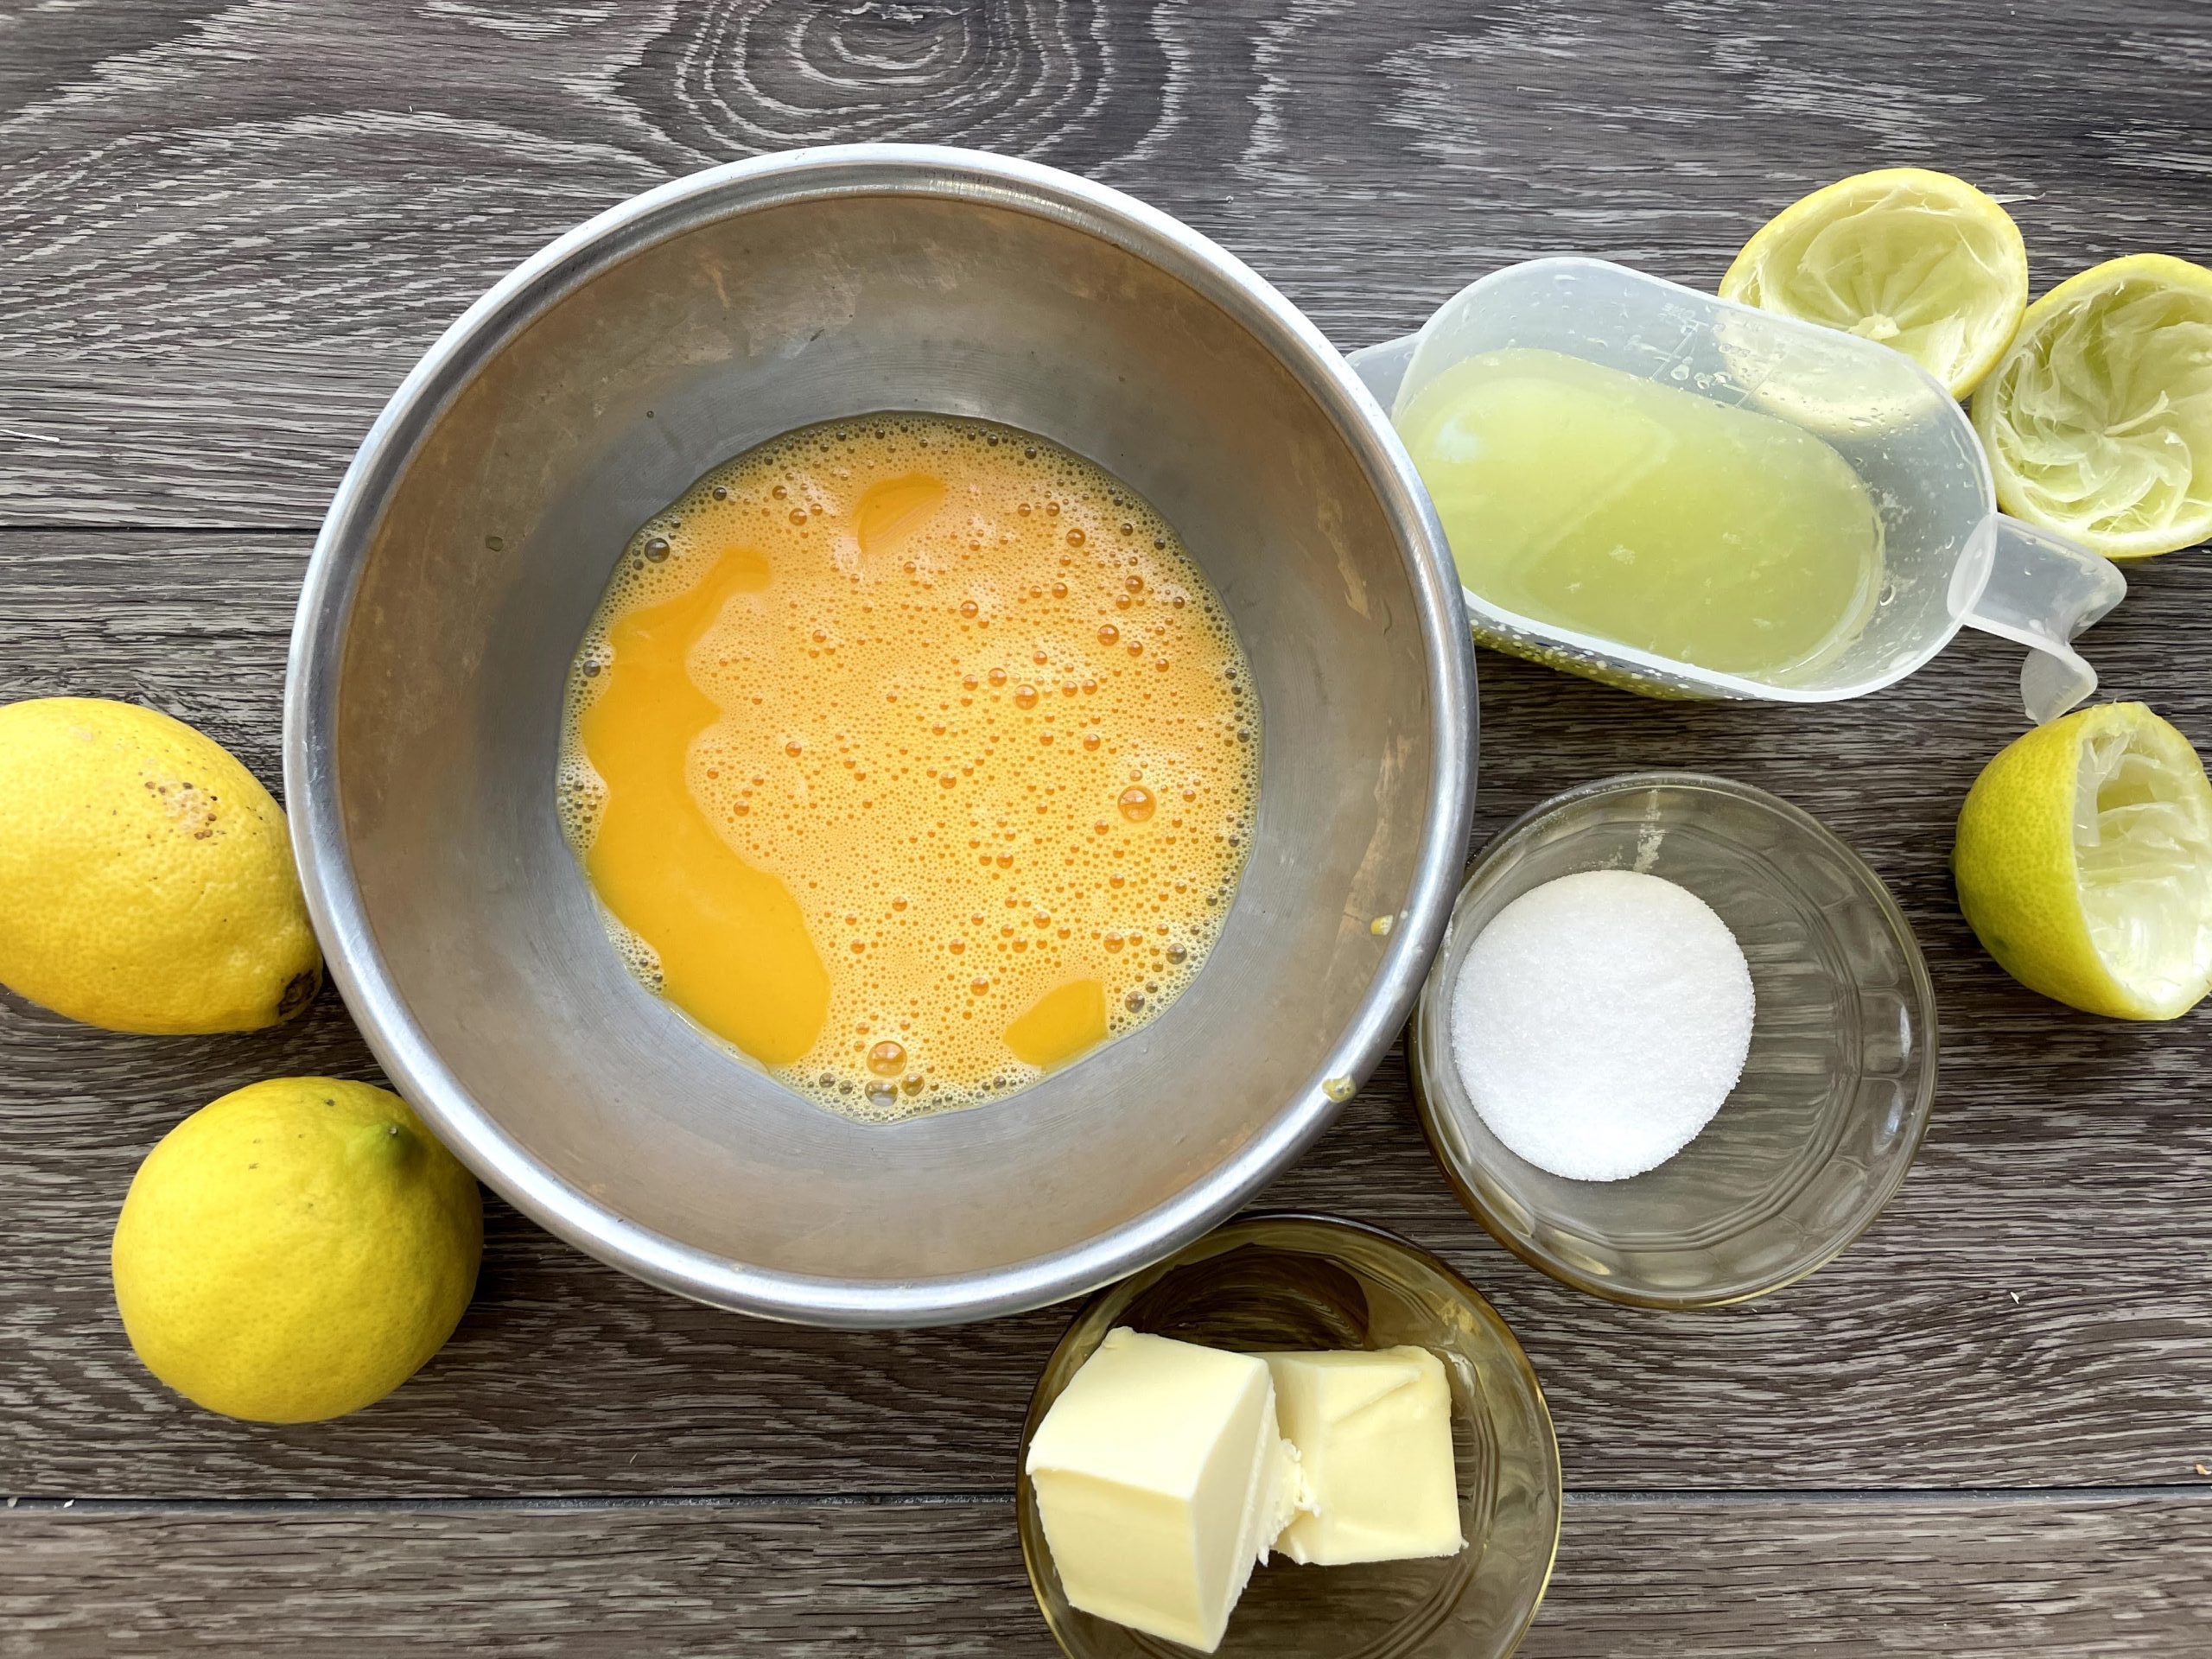 Ingredients for citrus butter